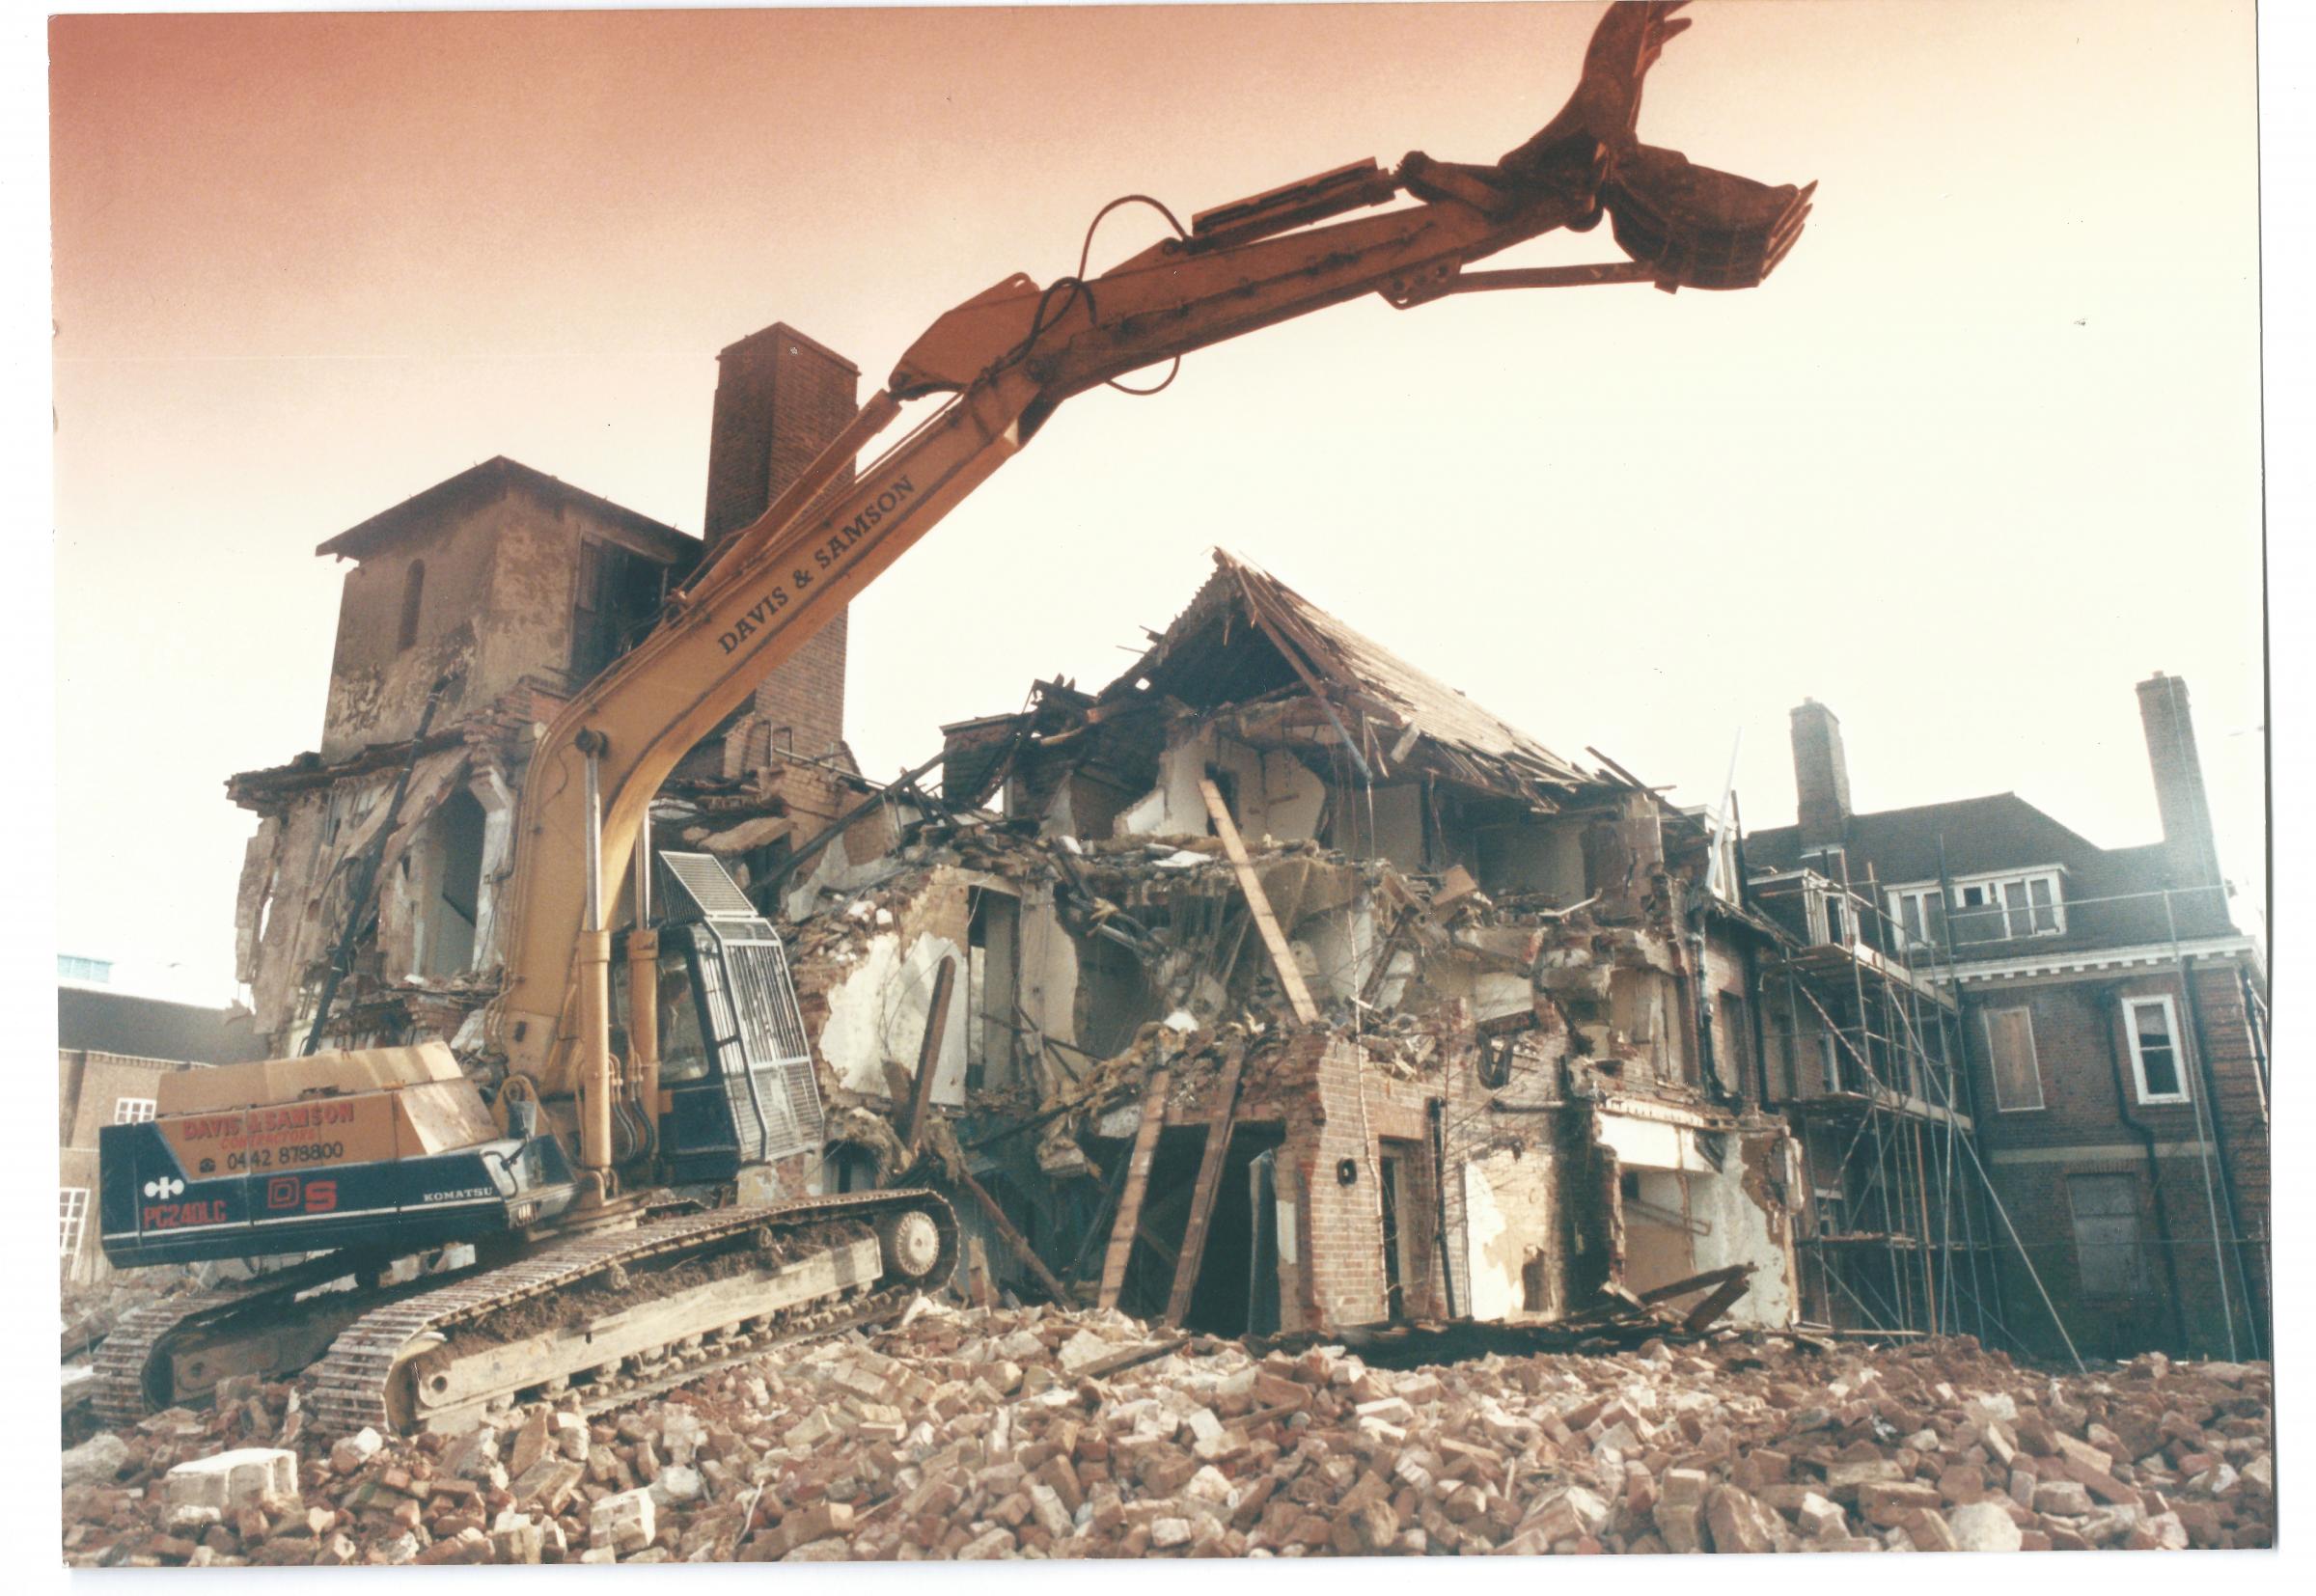 The demolition of the outer buildings of the Peace Hospice Hospital